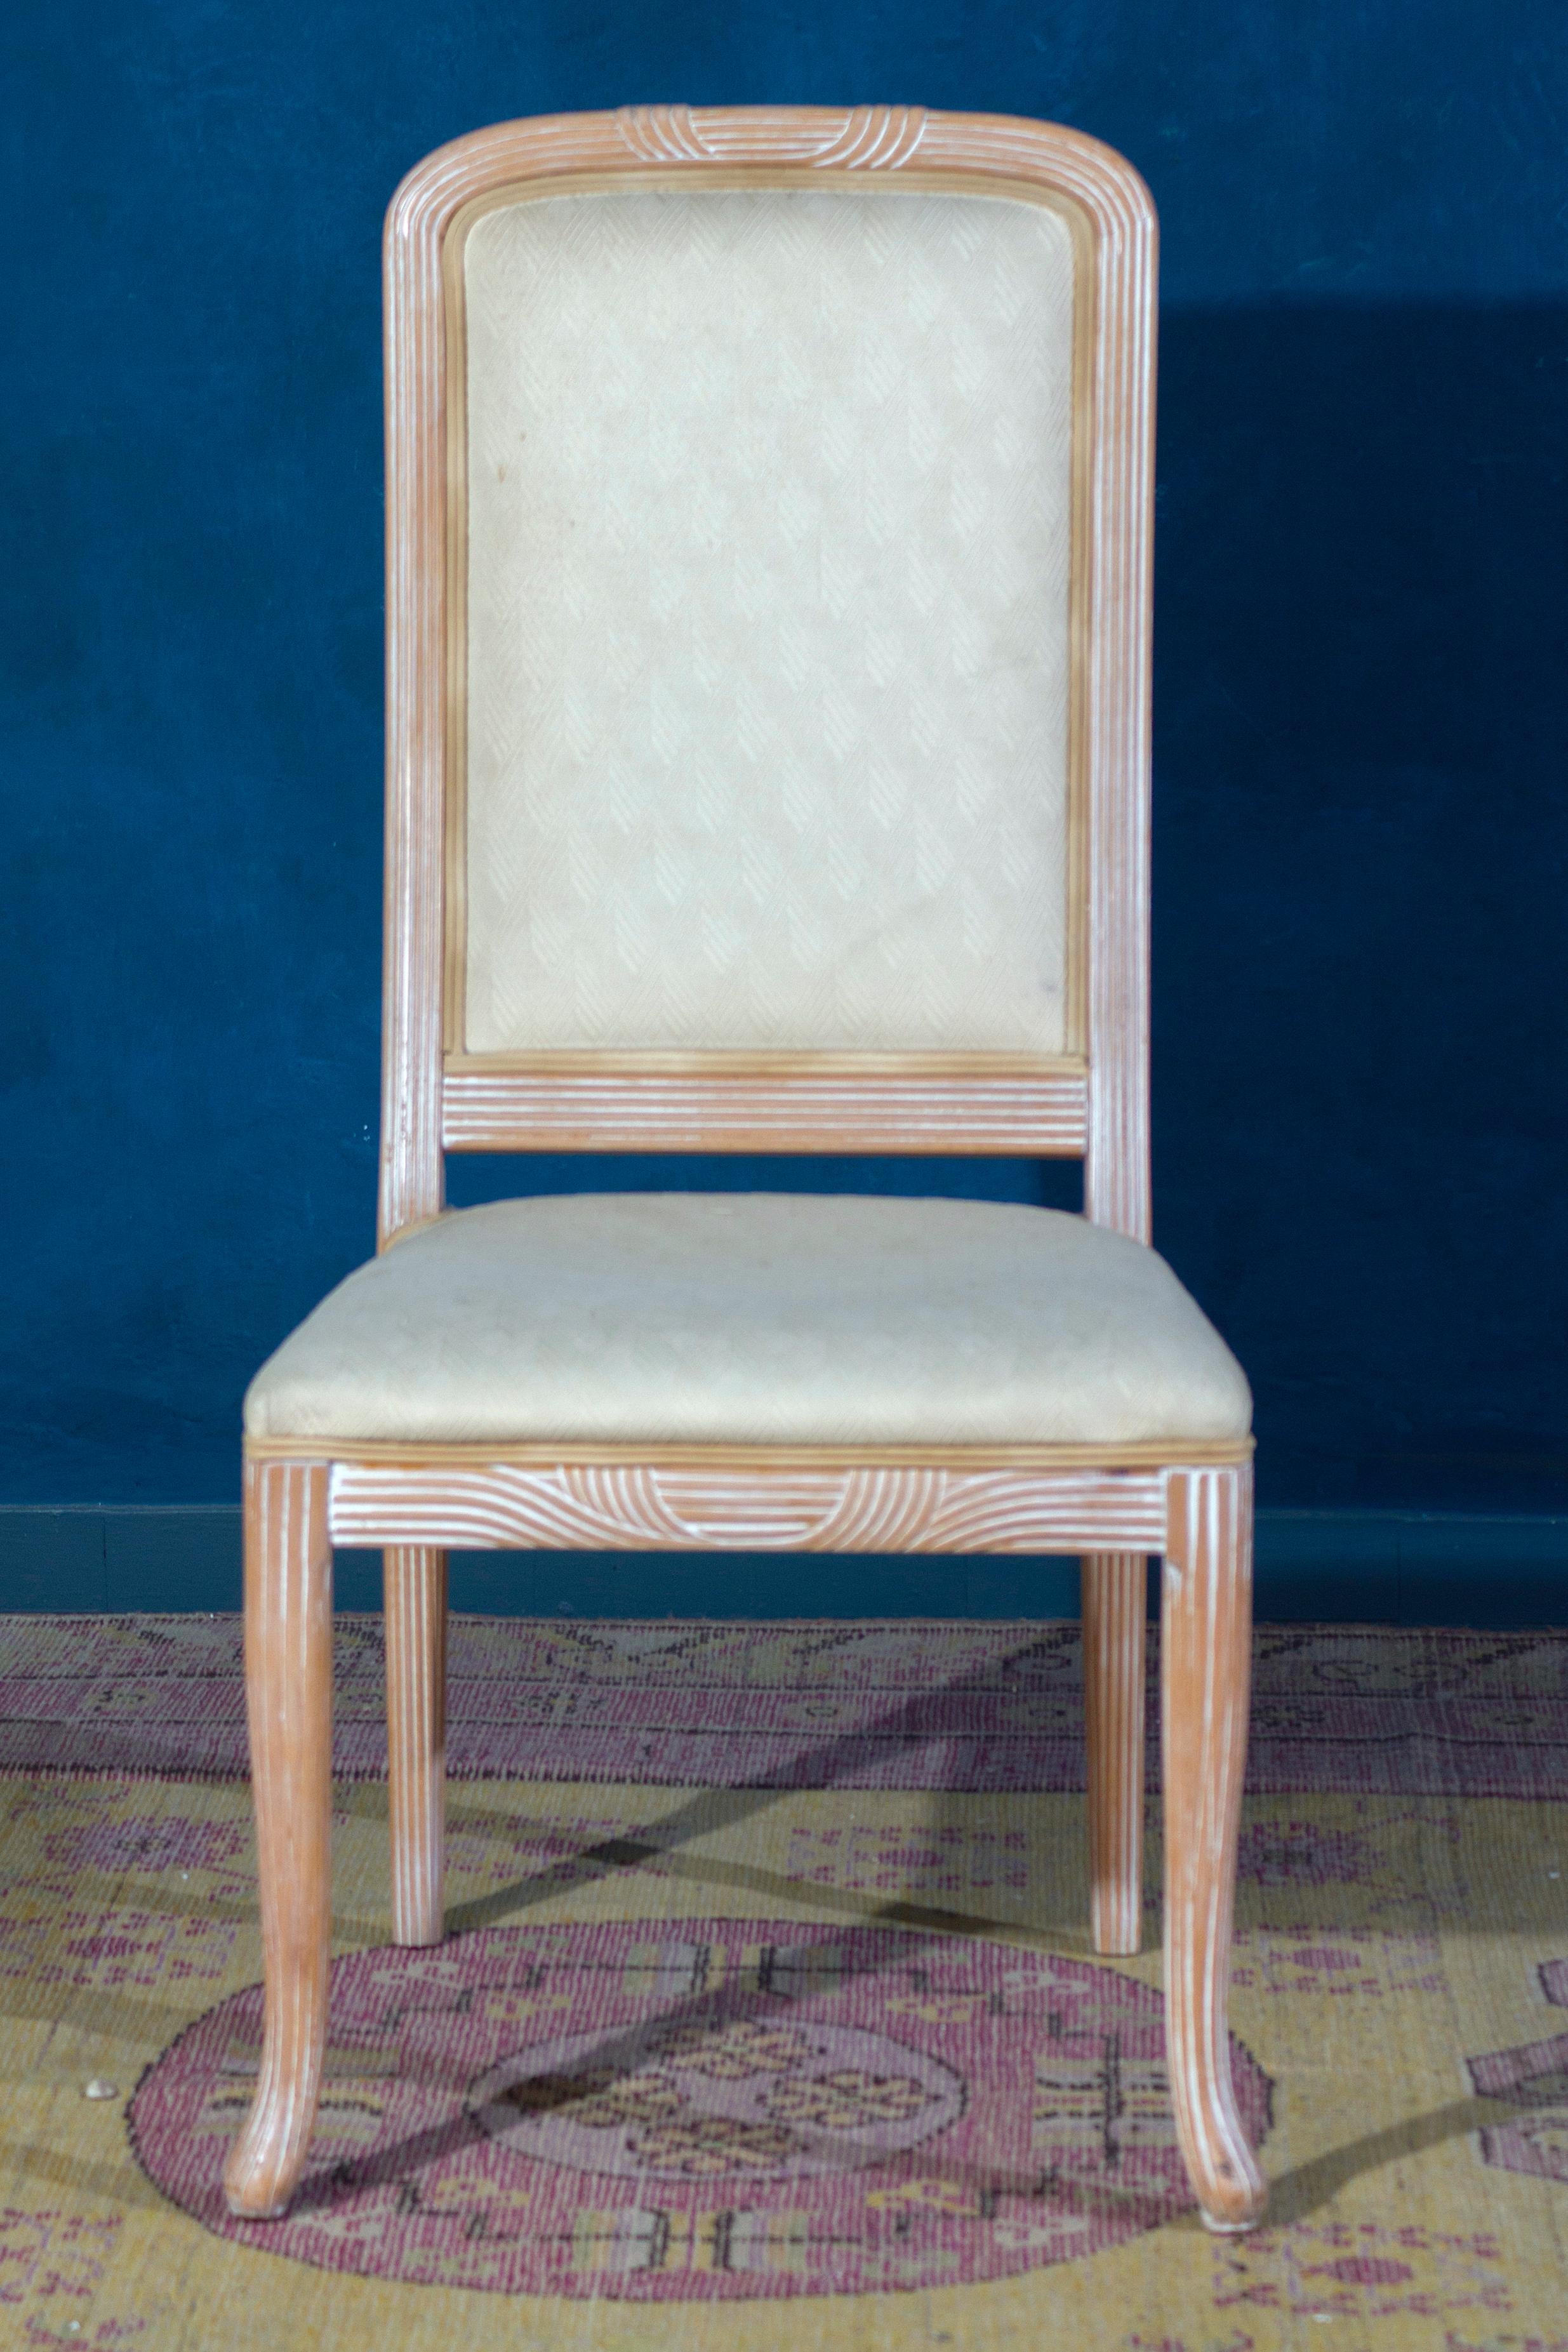 Set of eight Italian white decapè wood chairs with white upholstery seats.
Made in Italy 1970'. The wood is in perfect vintage condition. The upholstery is in very good condition only with the wear of time. 
Each chair has been masterfully crafted,